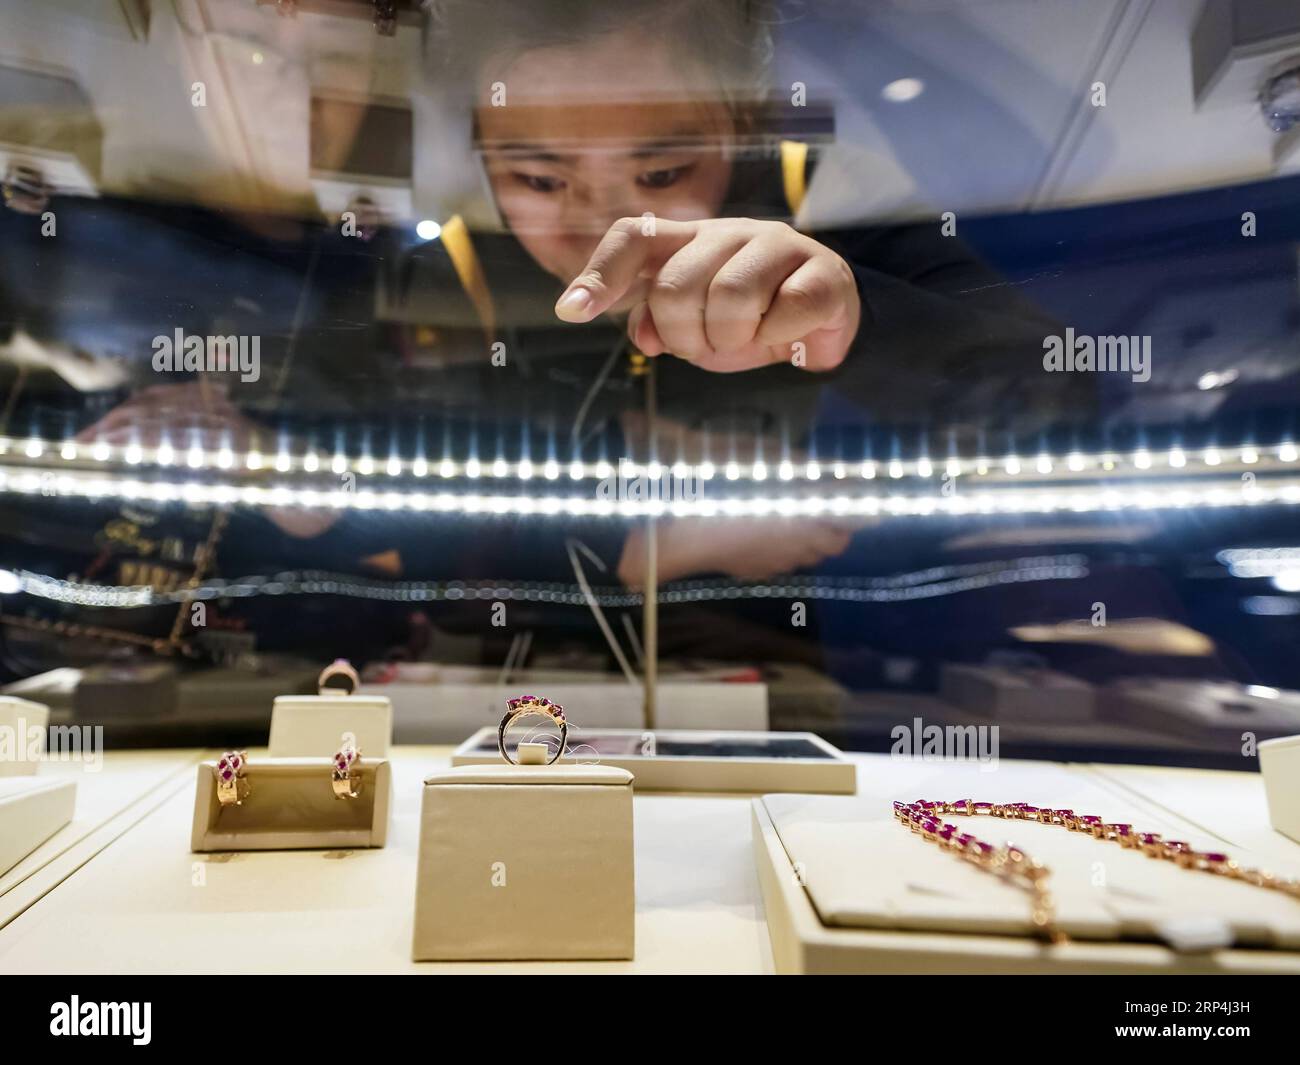 (181110) -- SHANGHAI, Nov. 10, 2018 -- Visitors view a ruby ring at the Apparel, Accessories & Consumer Goods area of the first China International Import Expo (CIIE) in Shanghai, east China, Nov. 9, 2018. )(ly) (IMPORT EXPO)CHINA-SHANGHAI-CIIE (CN) ShenxBohan PUBLICATIONxNOTxINxCHN Stock Photo